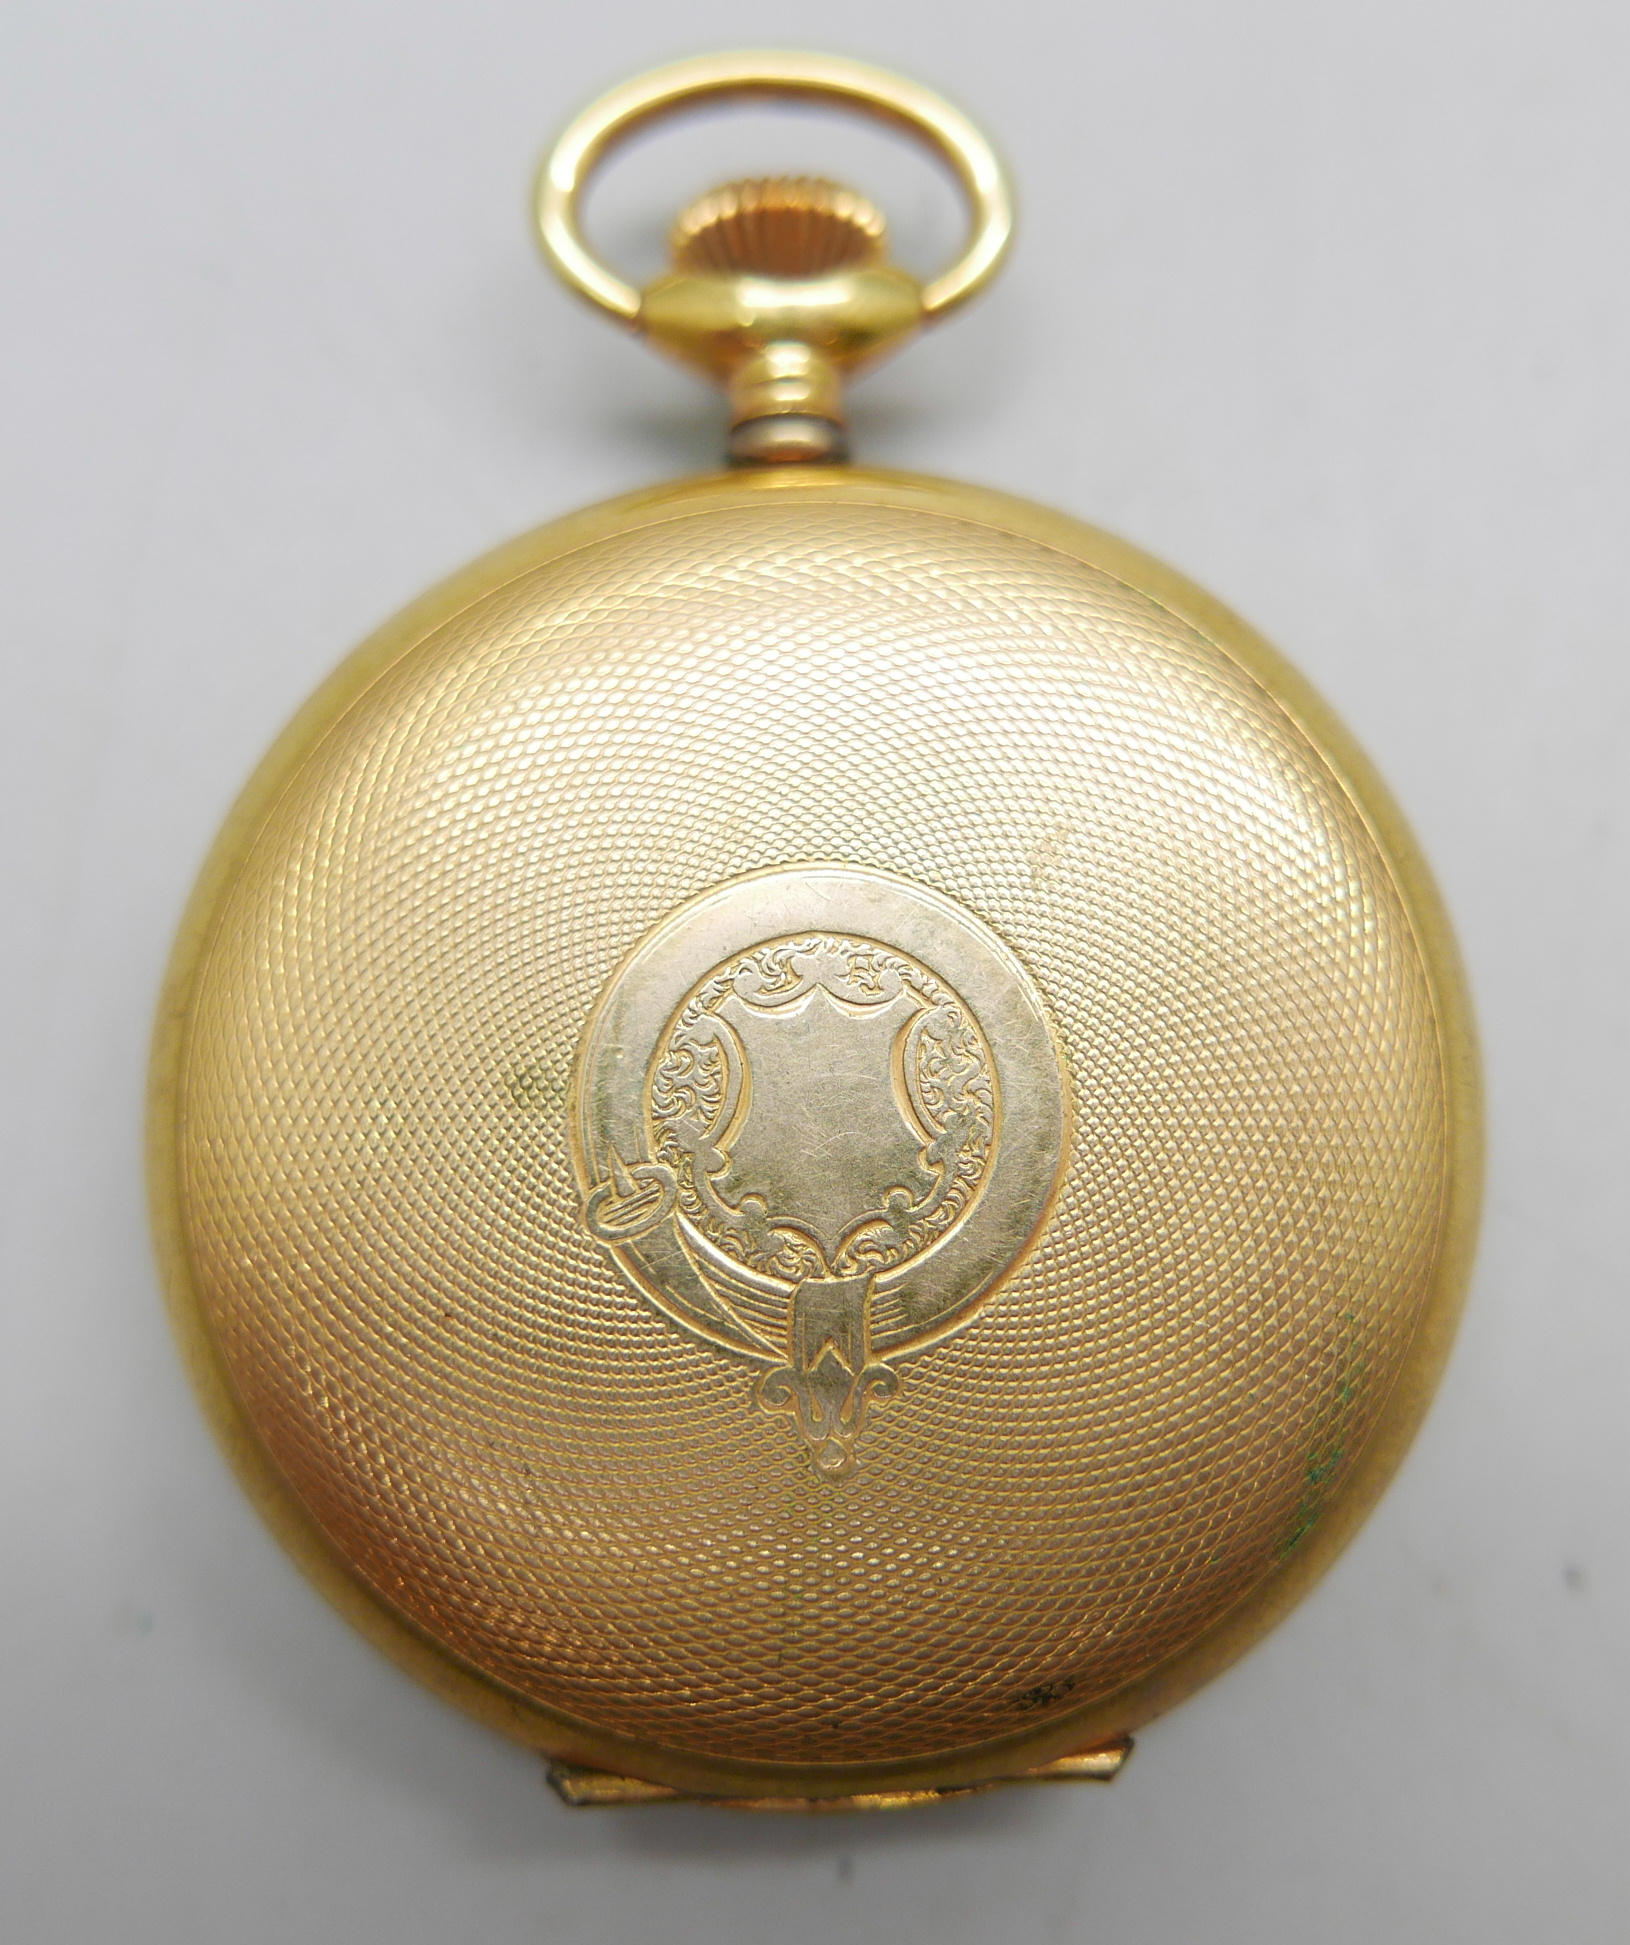 A gold filled full hunter pocket watch, Good Hope Lever, lacking glass - Image 5 of 5